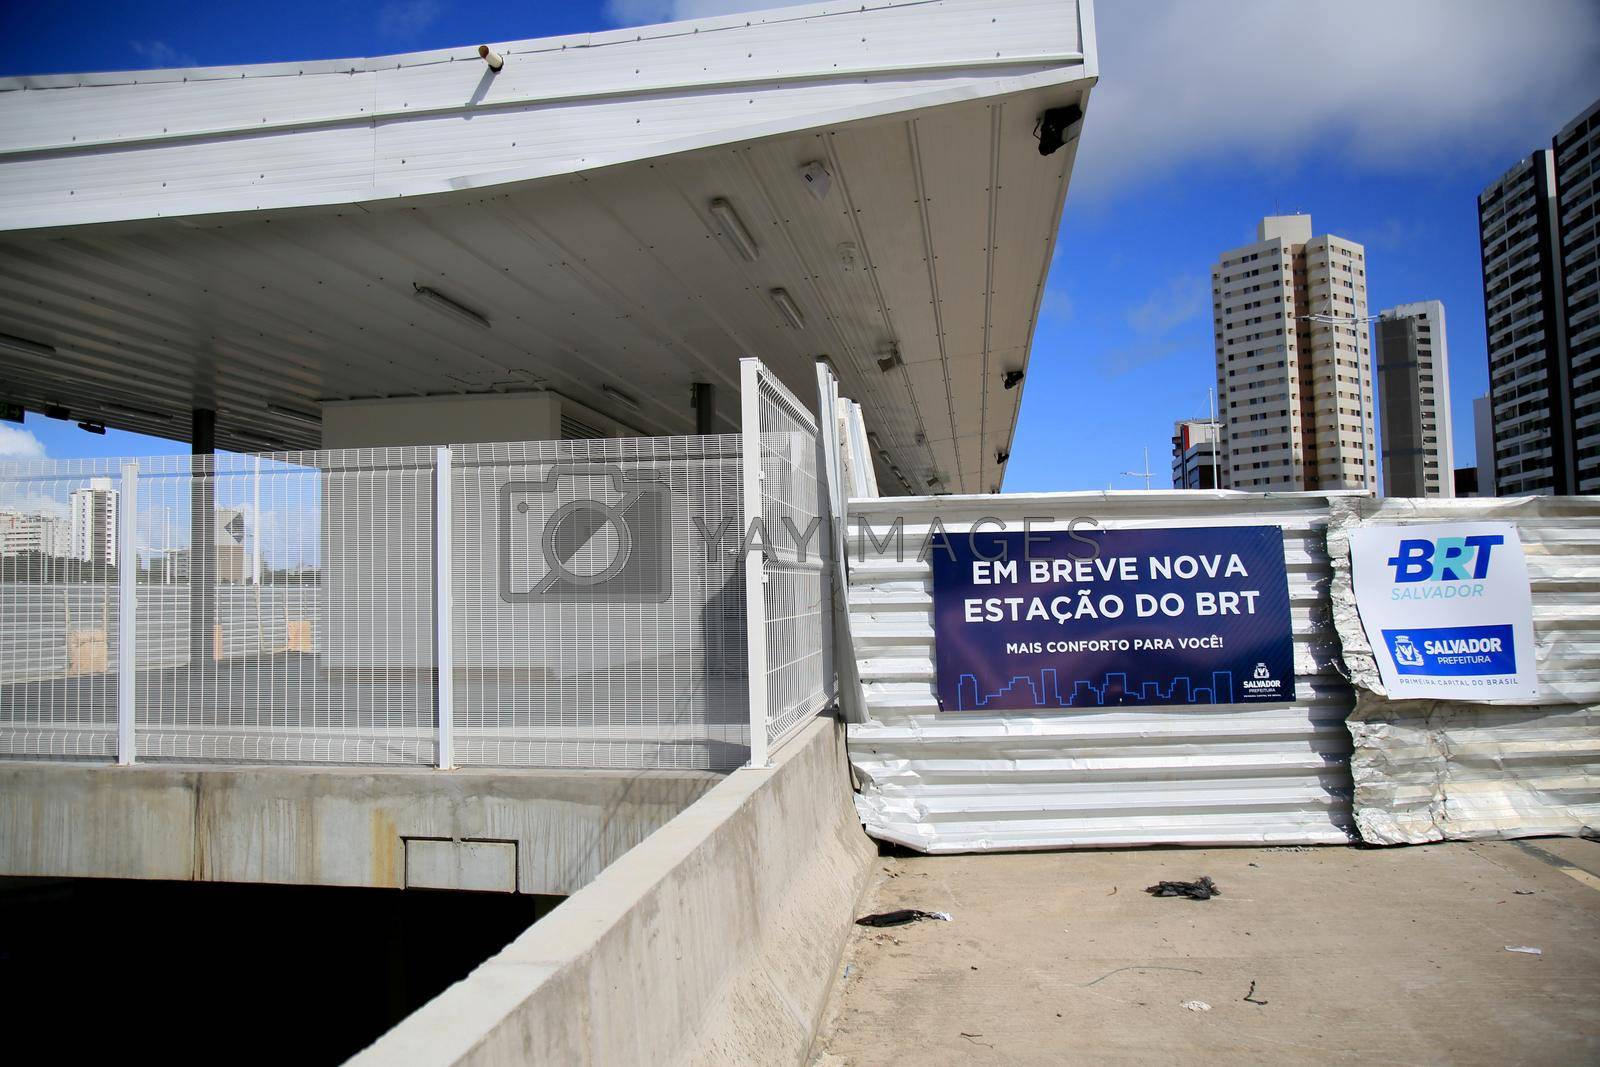 salvador, bahia, brazil - july 20, 2021: view of a BRT station under construction on Avenida ACM in the city of Salvador.